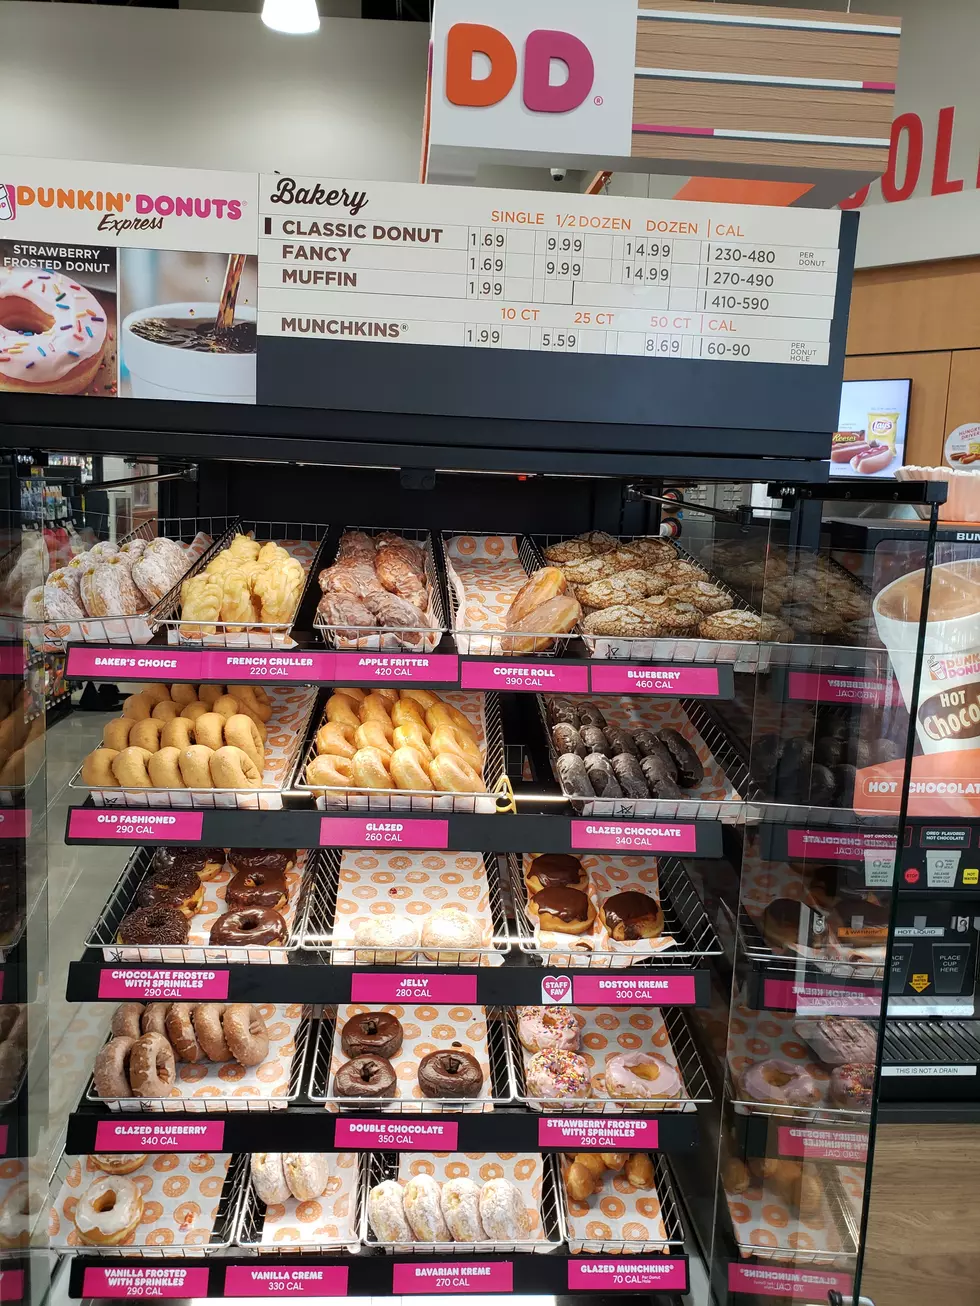 Dunkin Donuts NOW Open At Pilot on Fm 1788 and Hwy 191